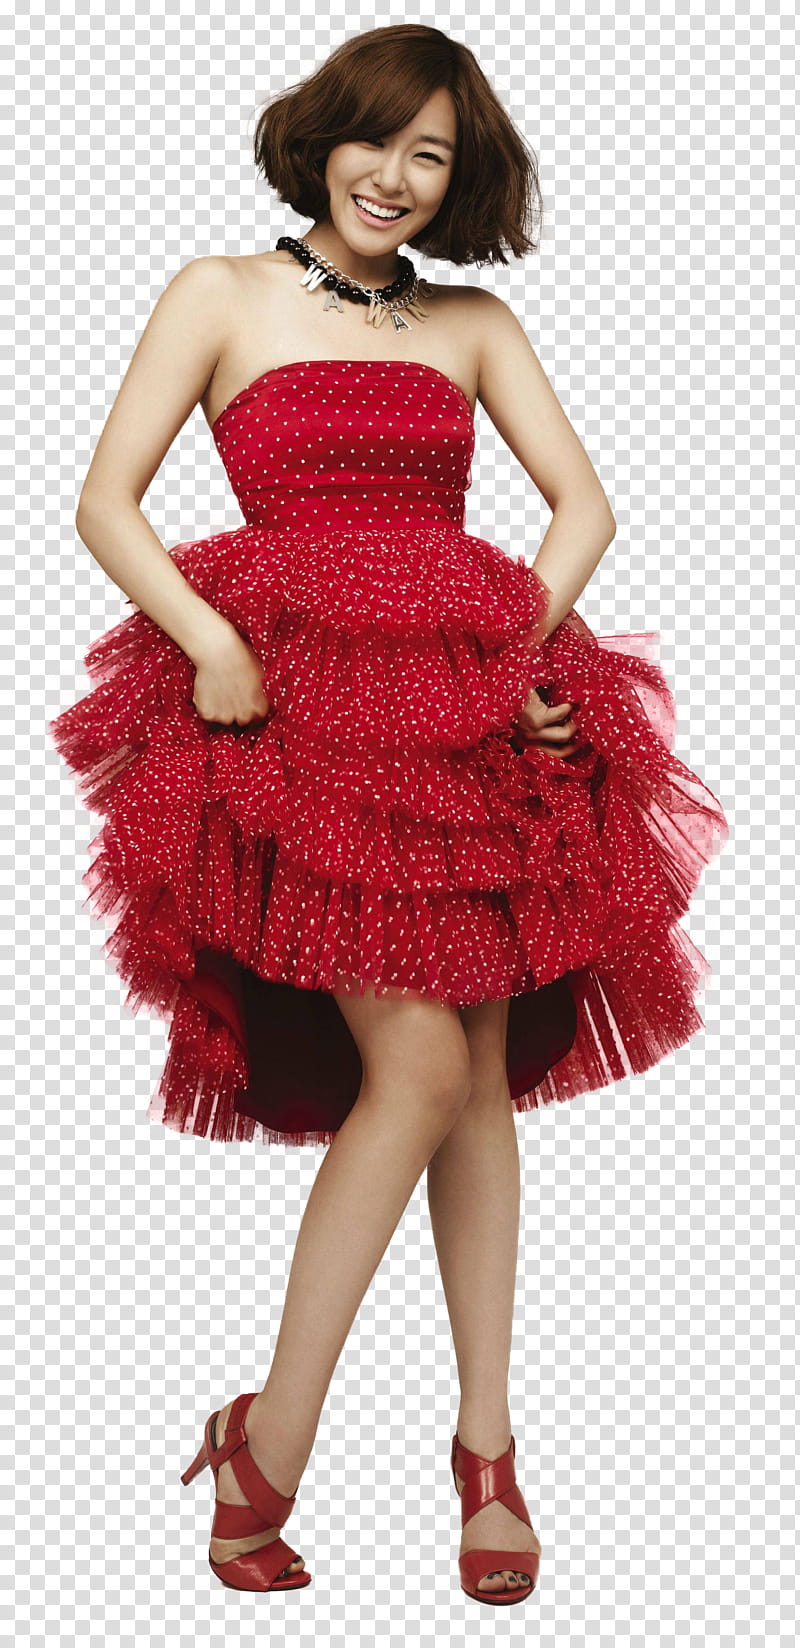 Girls Generation SNSD, standing woman wearing red tube dress transparent background PNG clipart